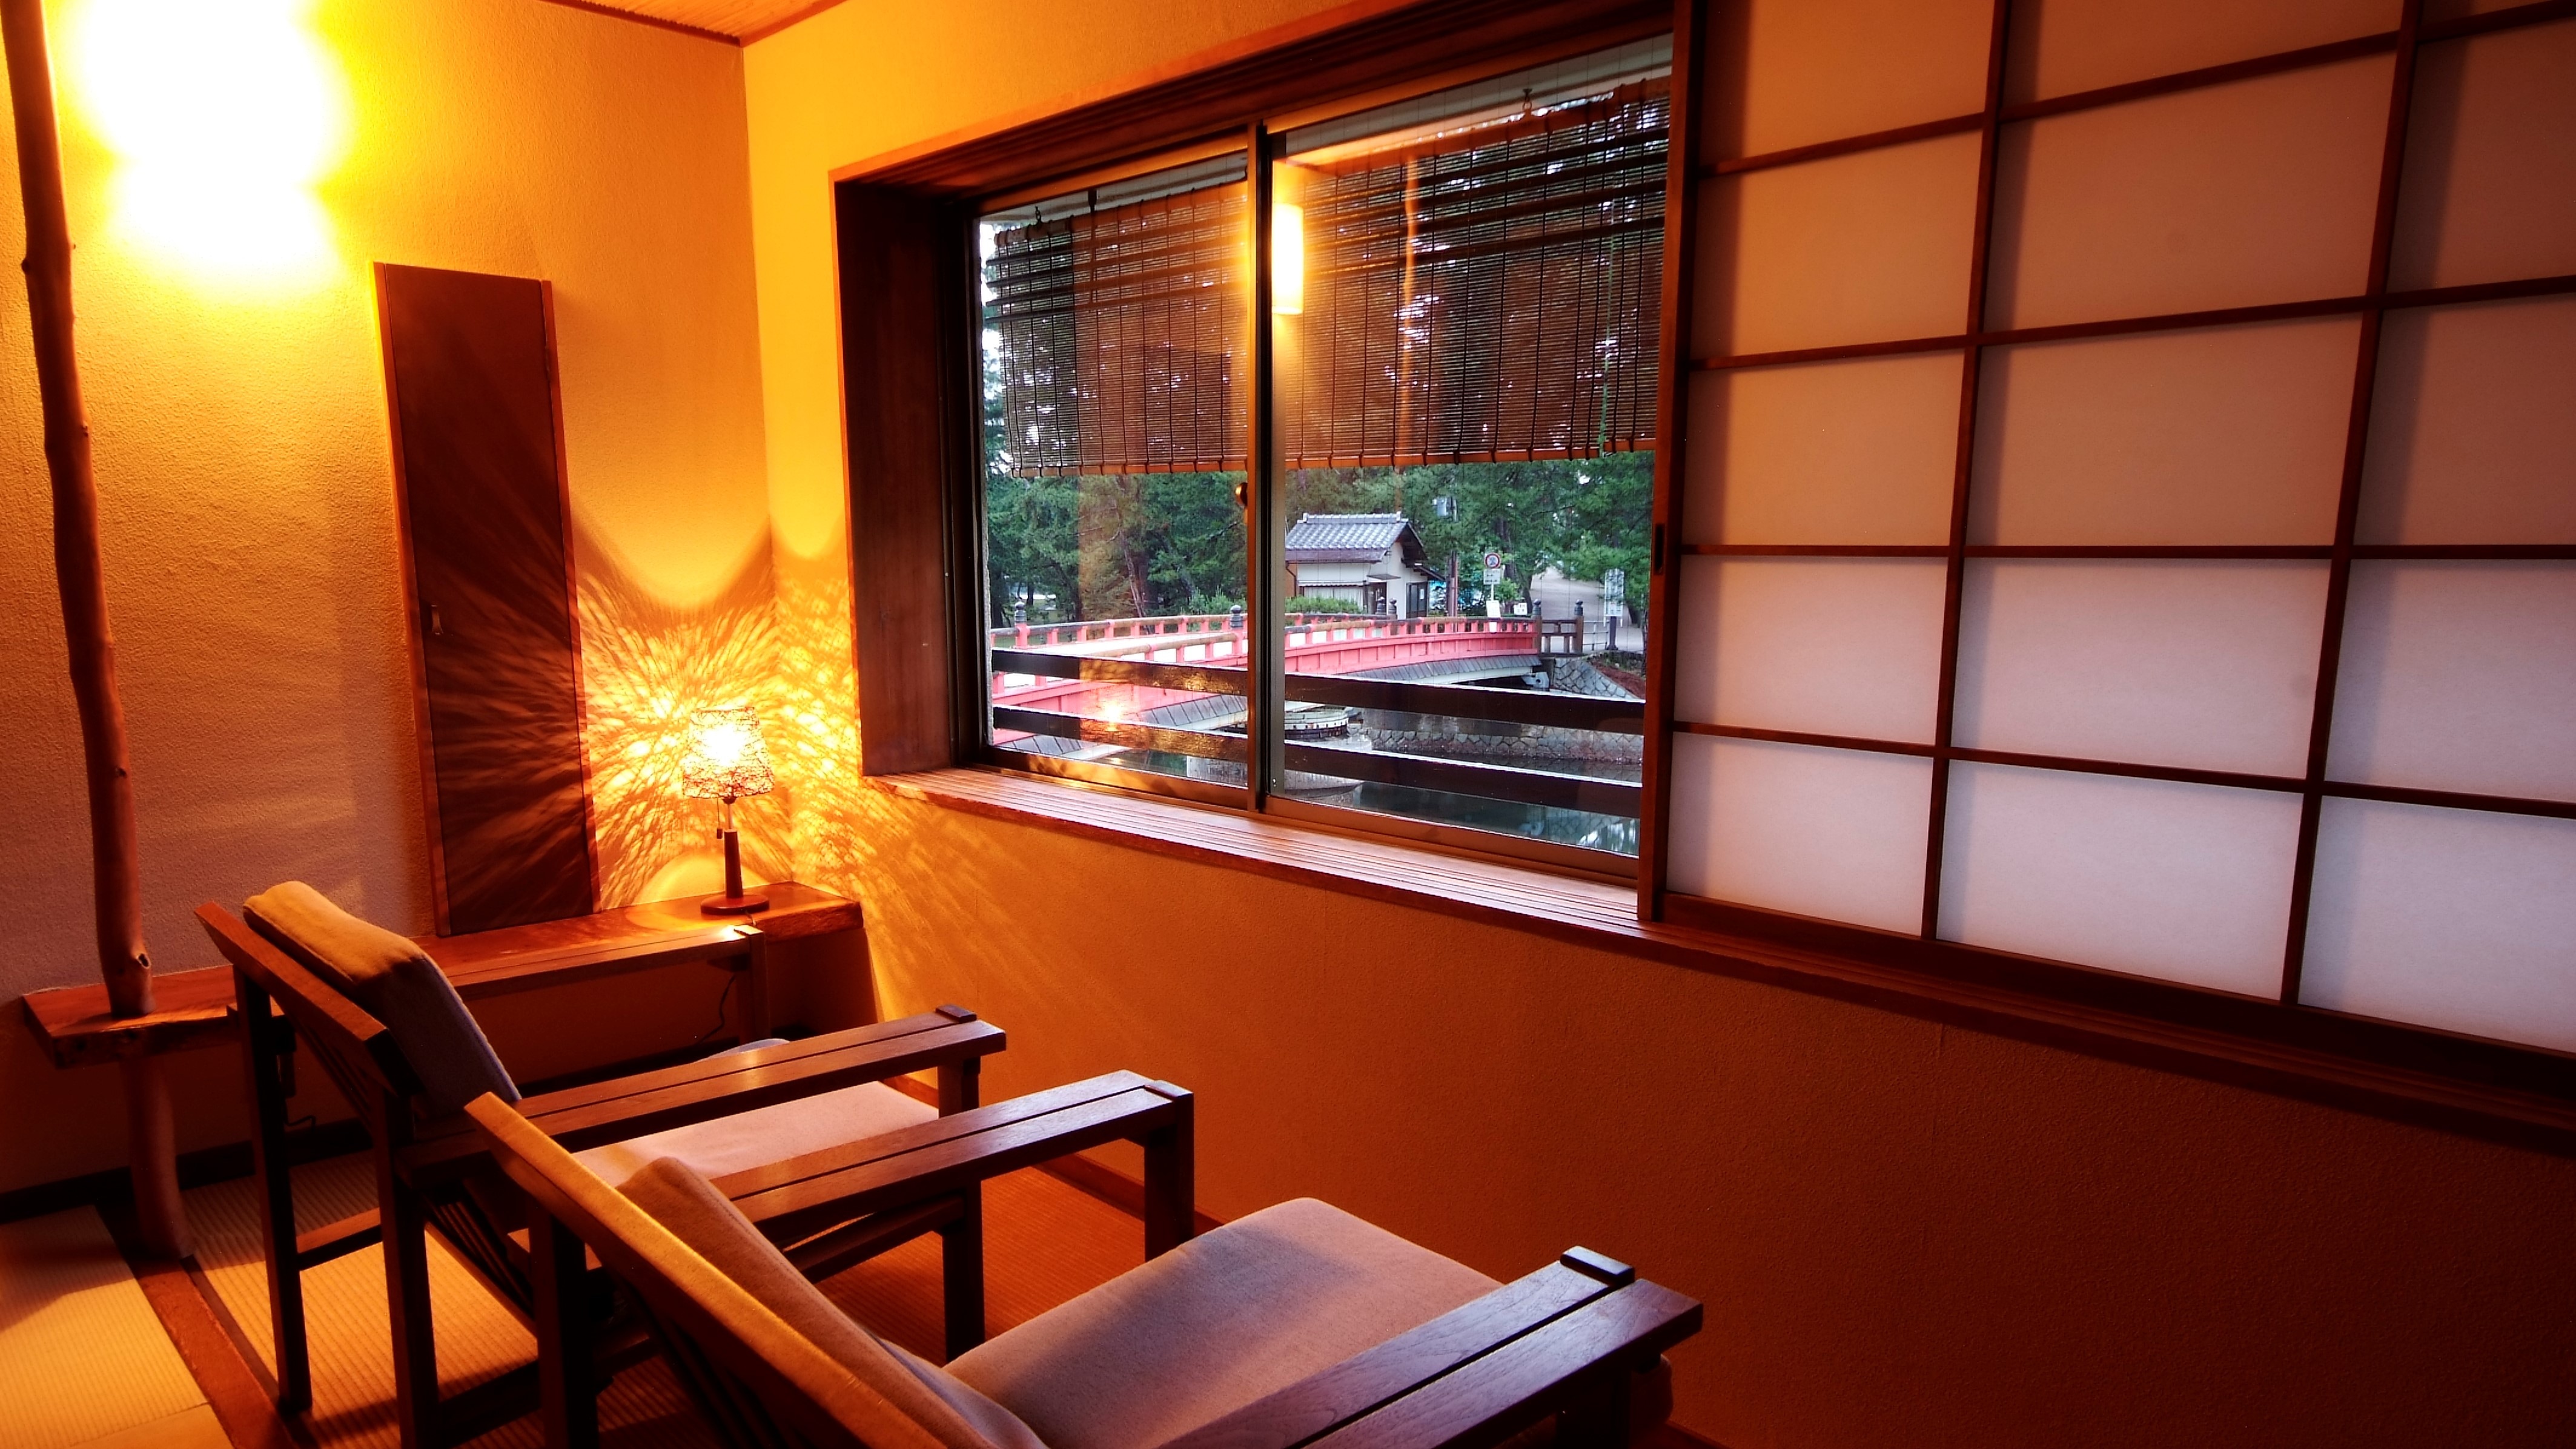 [Modern Japanese-style room with a view of Amanohashidate] The view of Amanohashidate is also popular. There is only one stylish modern Japanese-style room